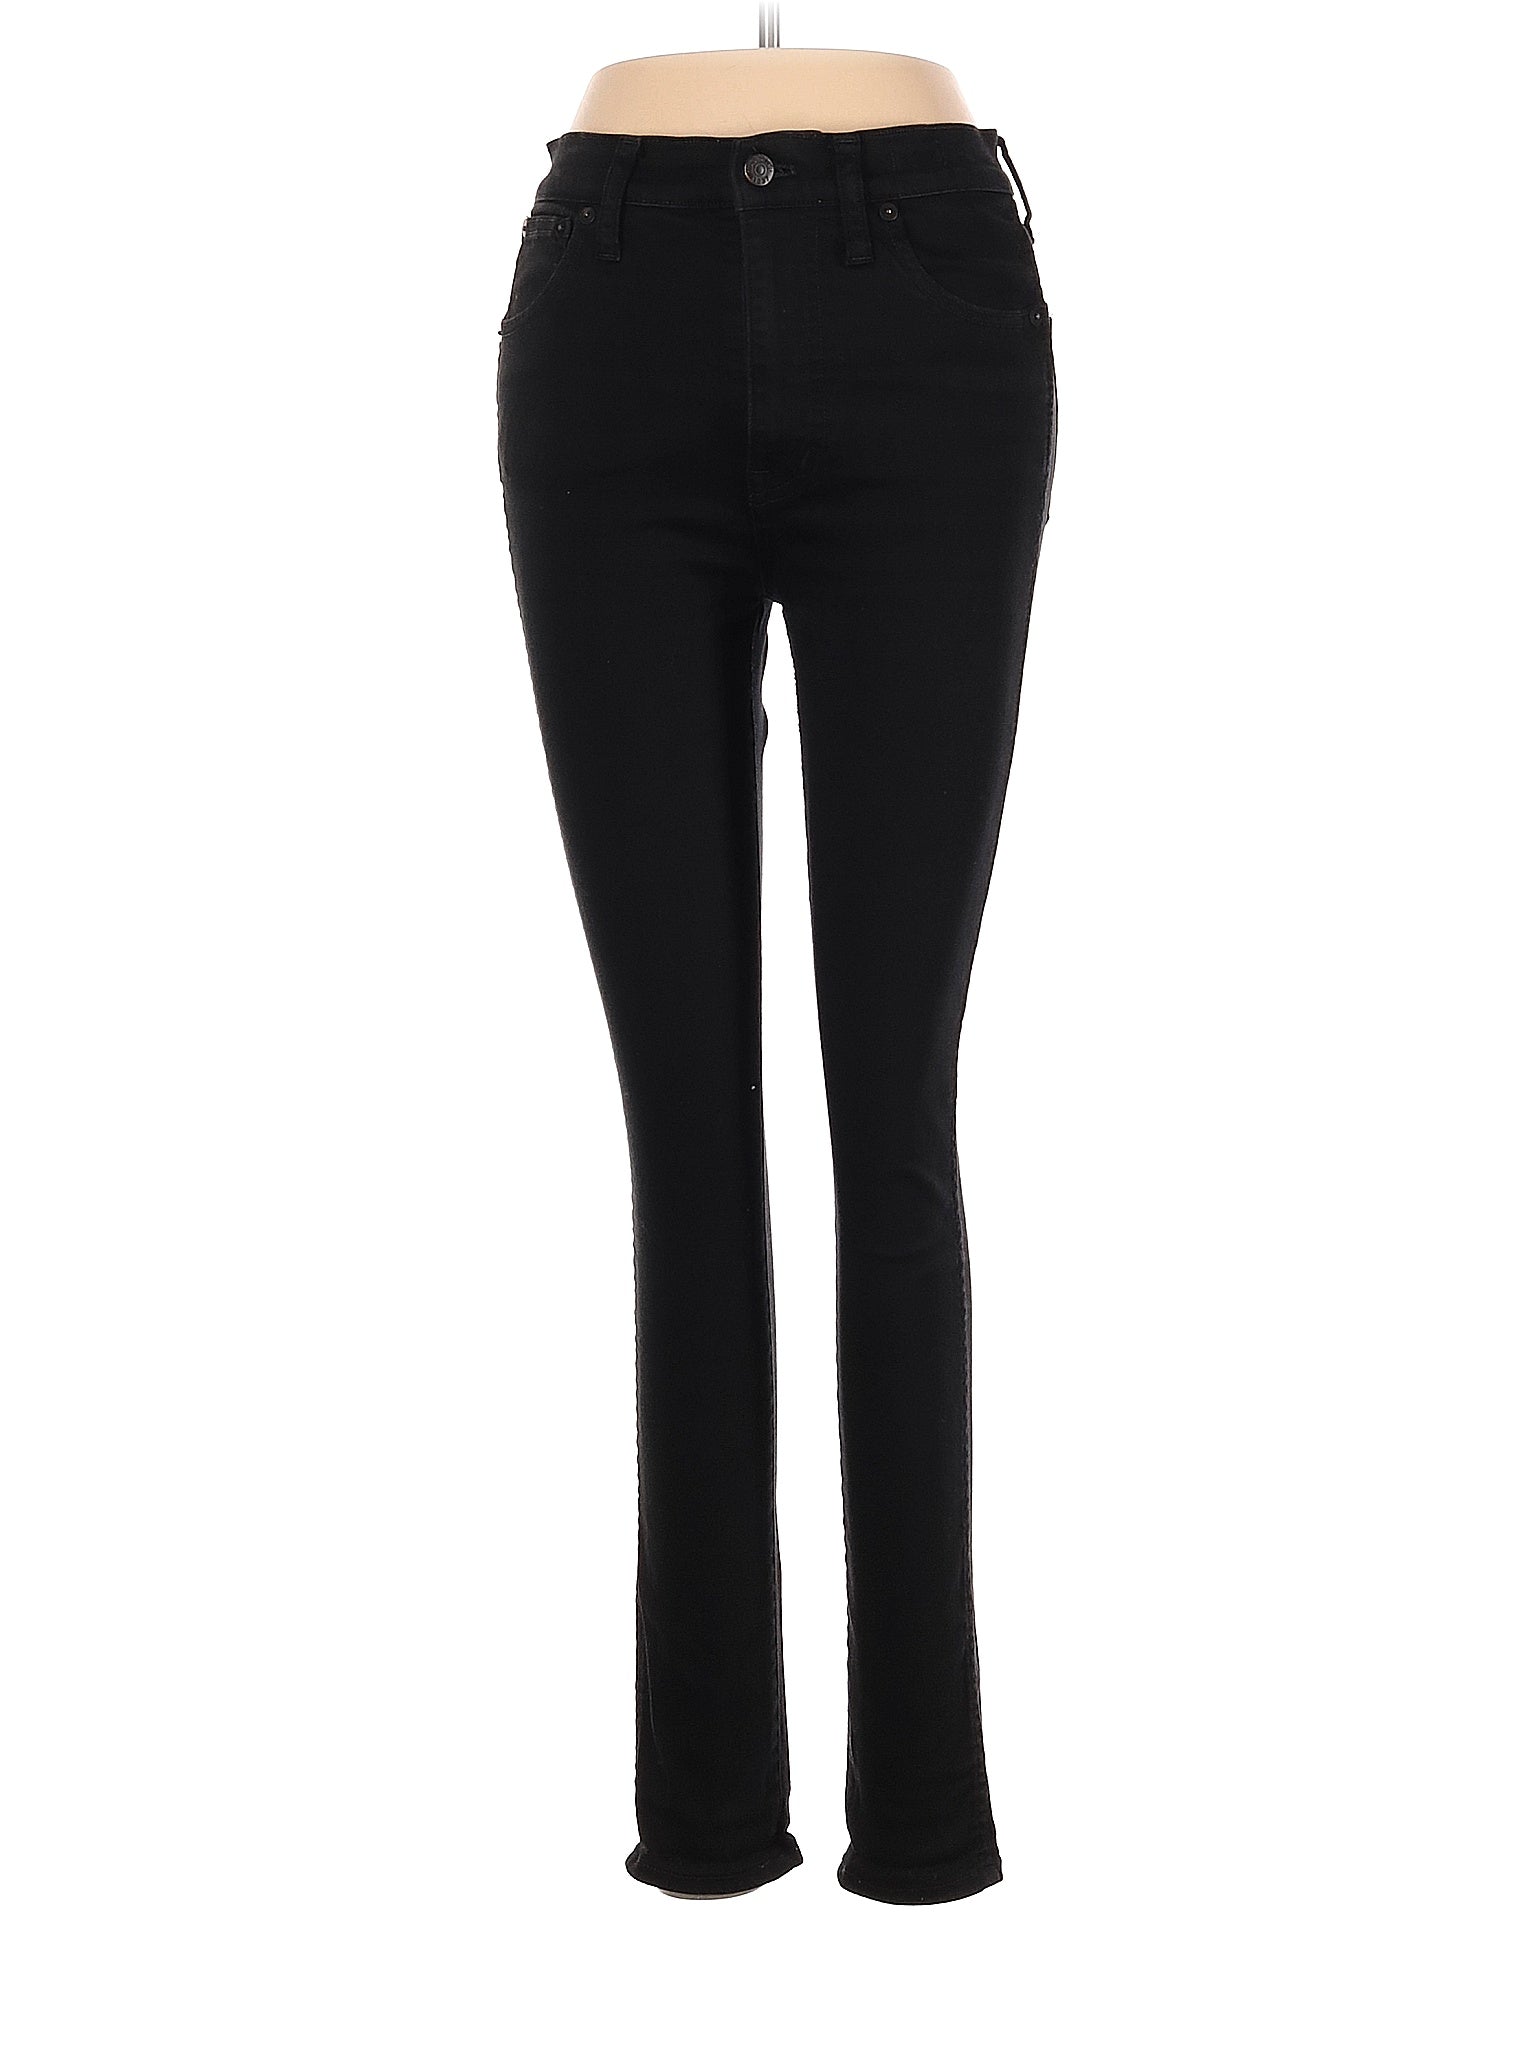 Mid-Rise Skinny 10" High-Rise Skinny Jeans In Carbondale Wash in Dark Wash waist size - 27